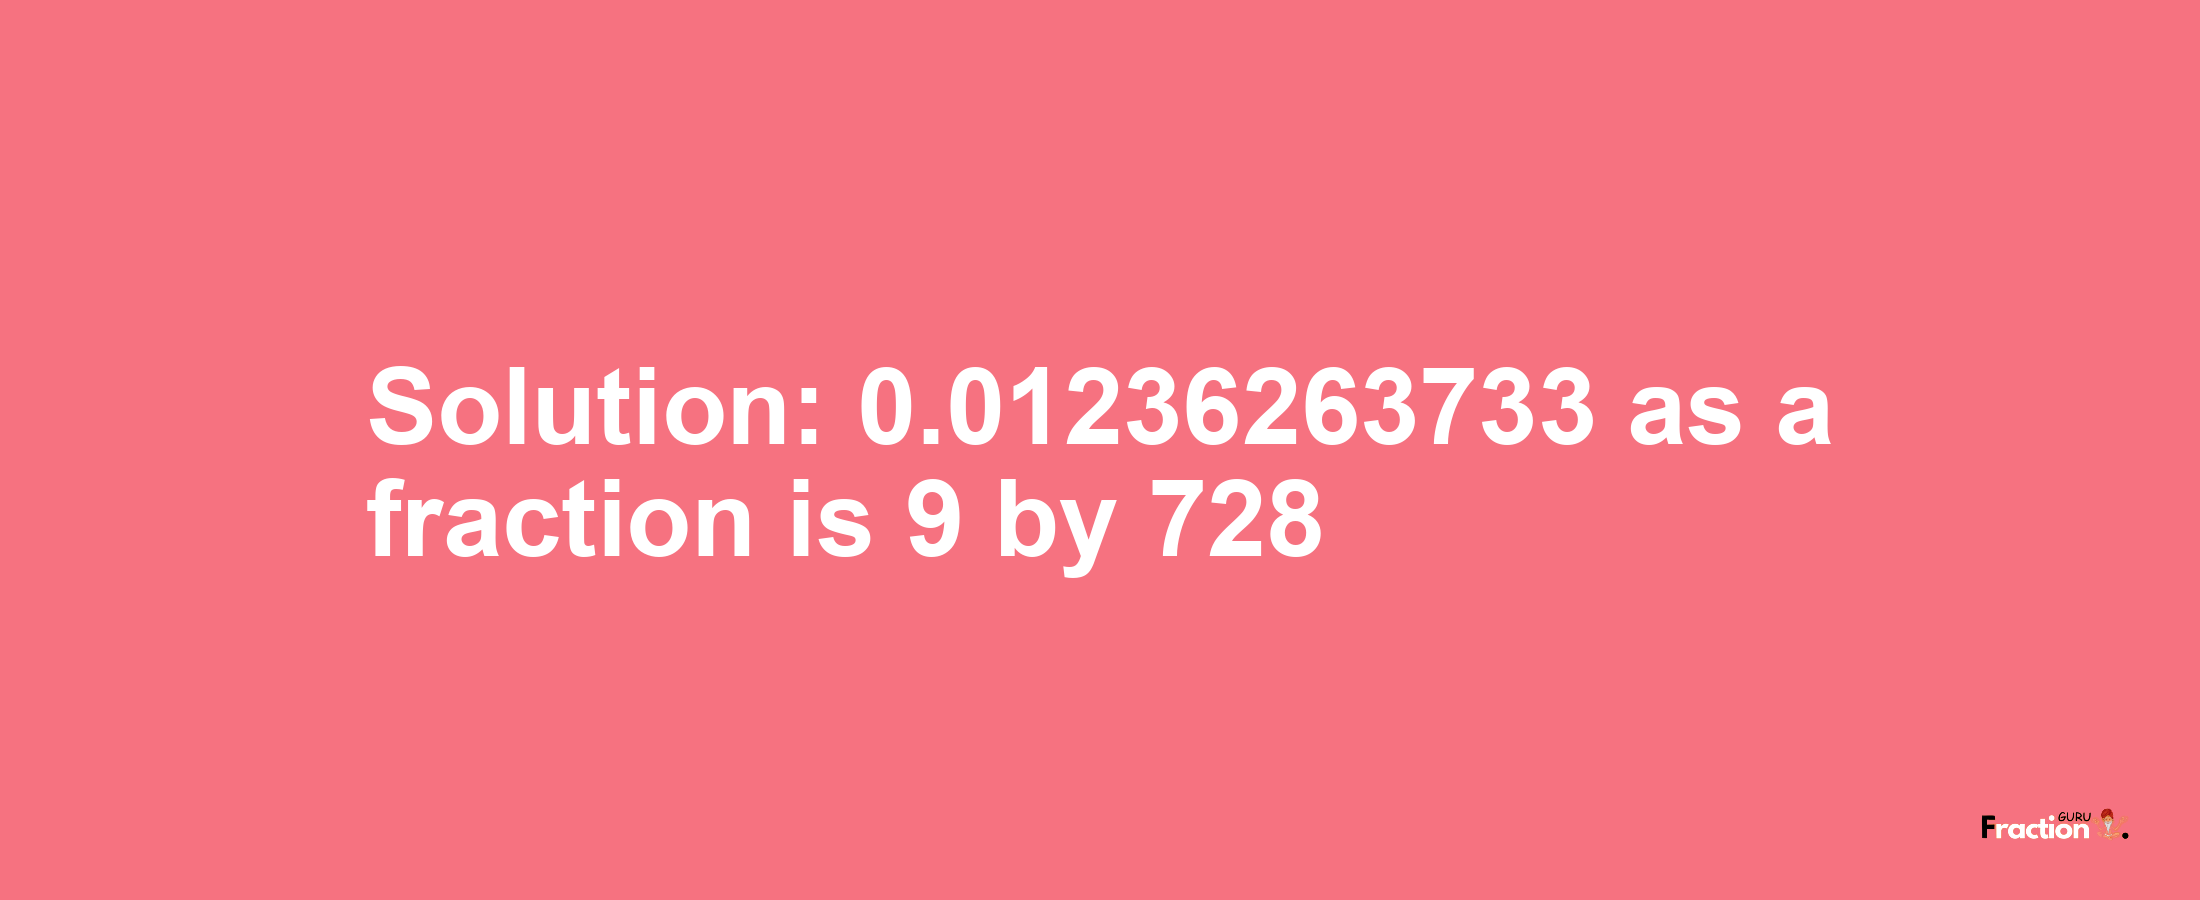 Solution:0.01236263733 as a fraction is 9/728